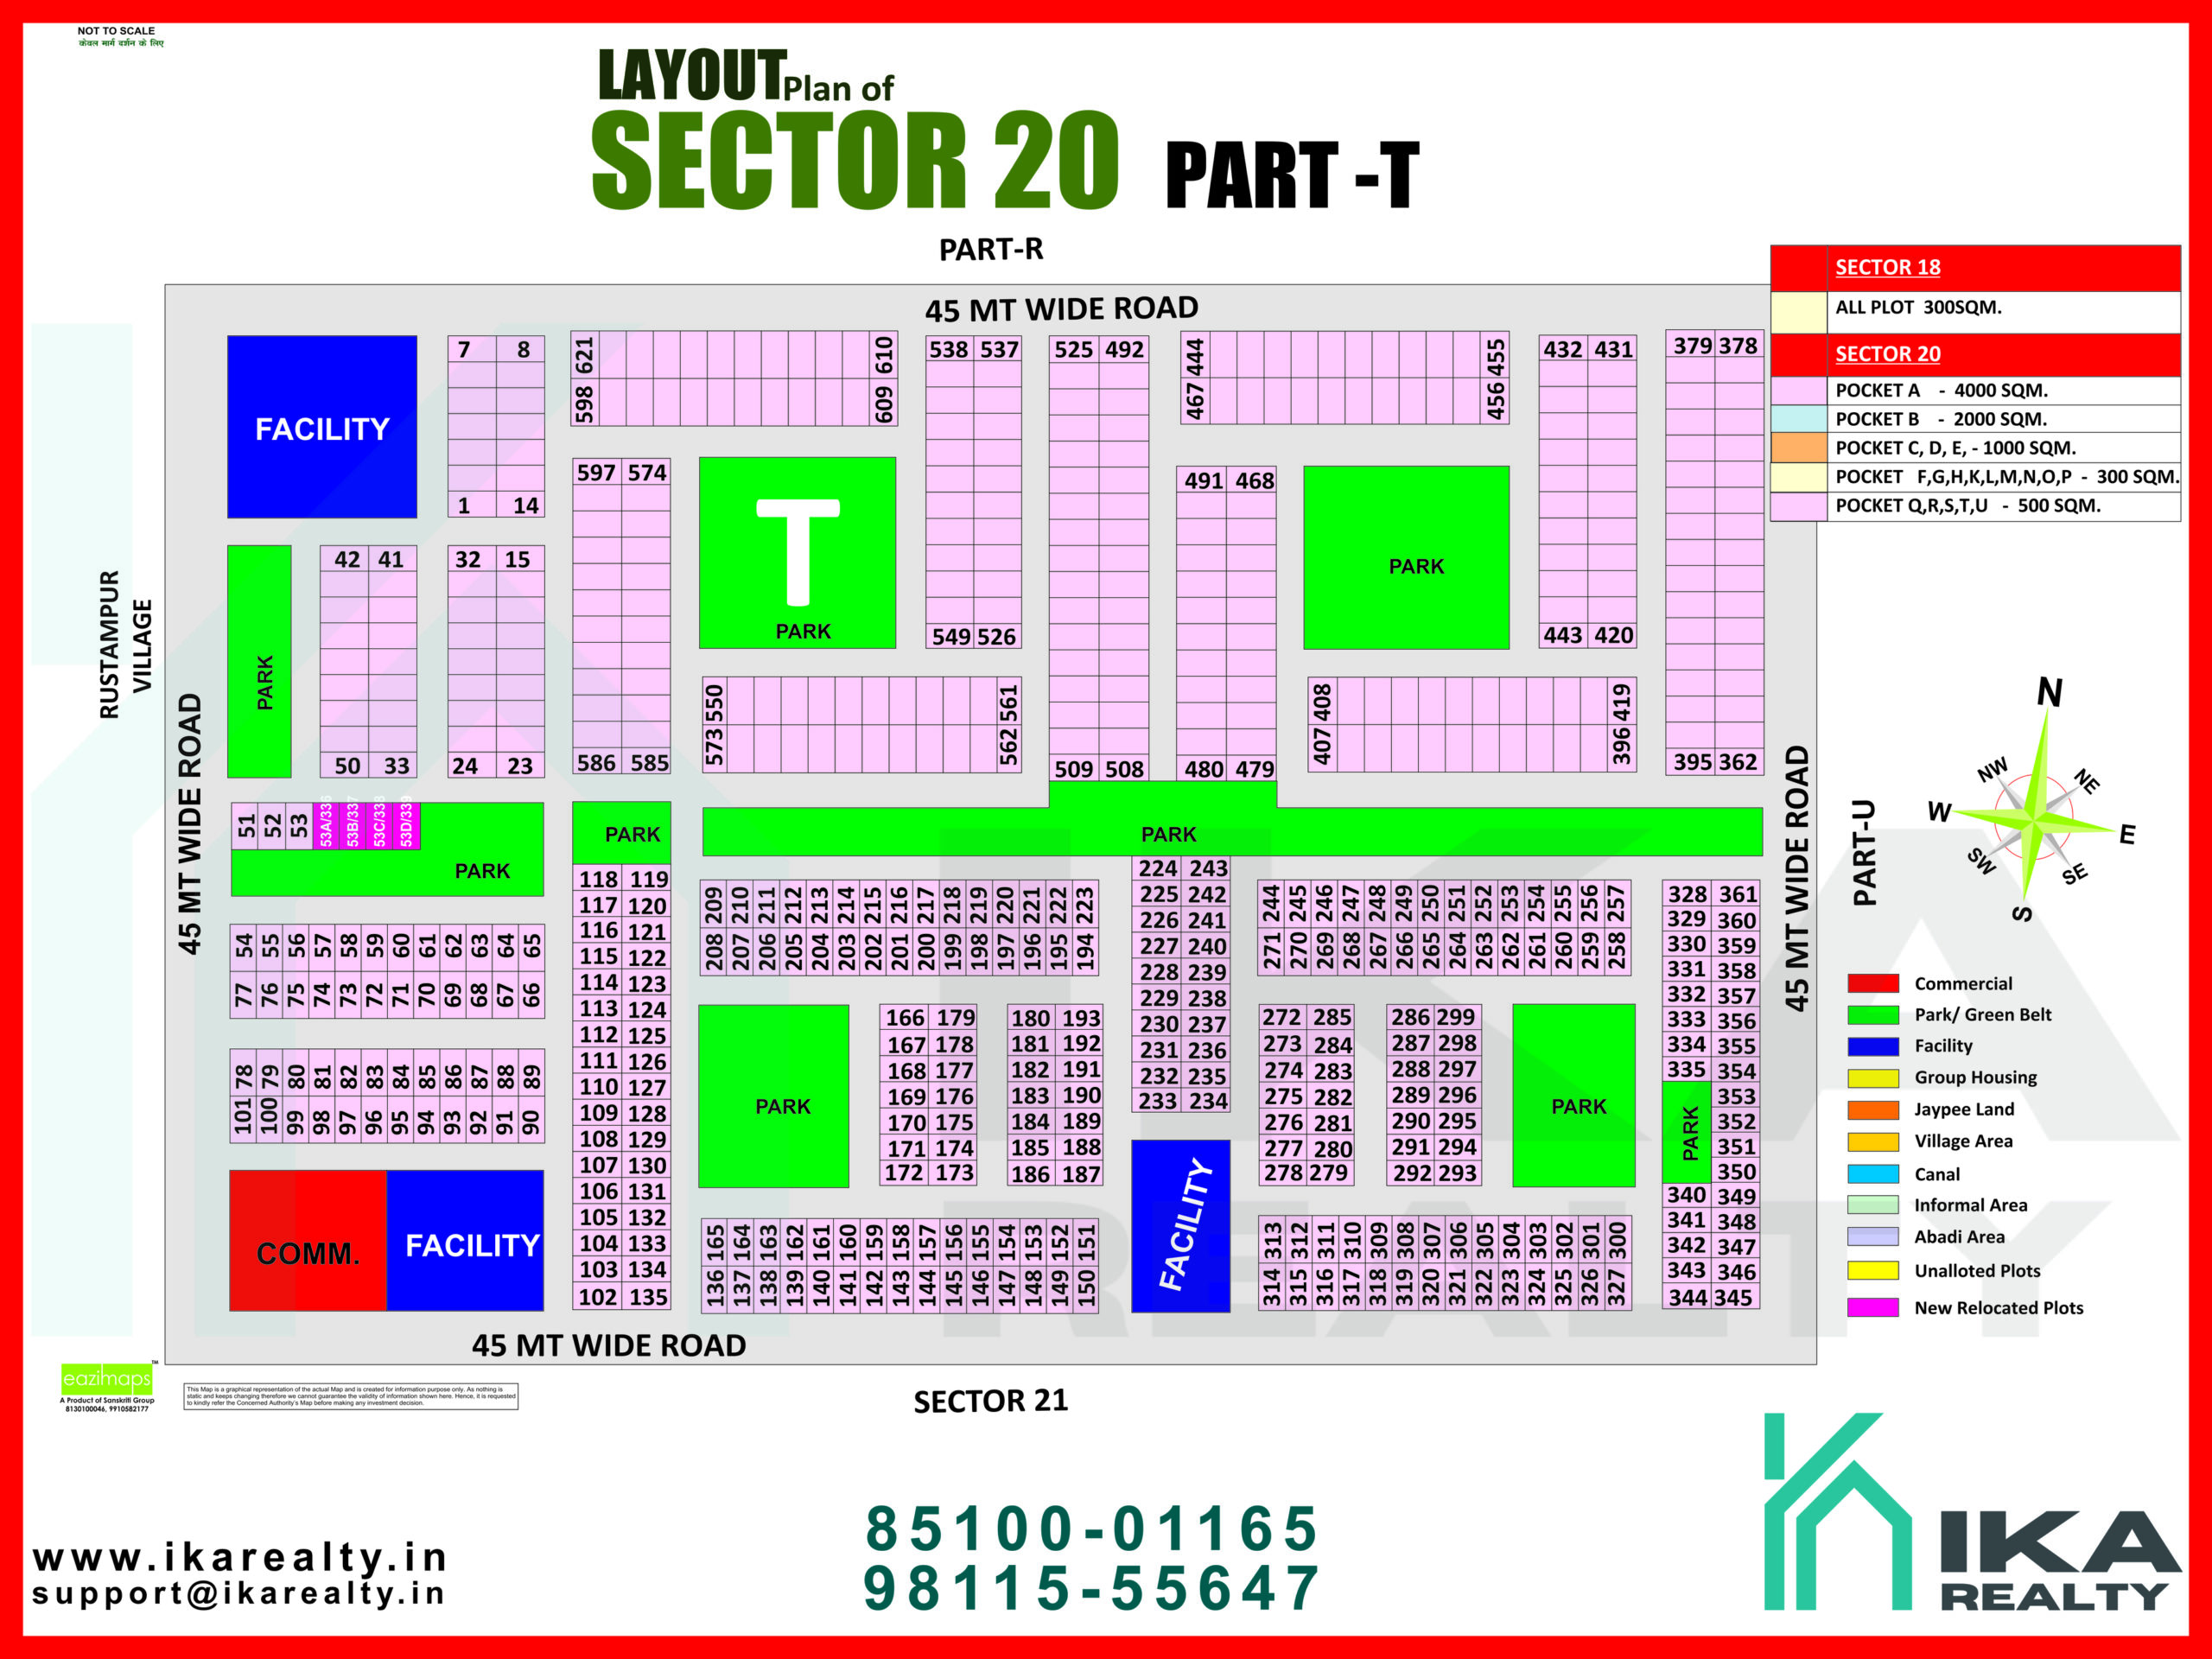 SECTOR-20 PART-T